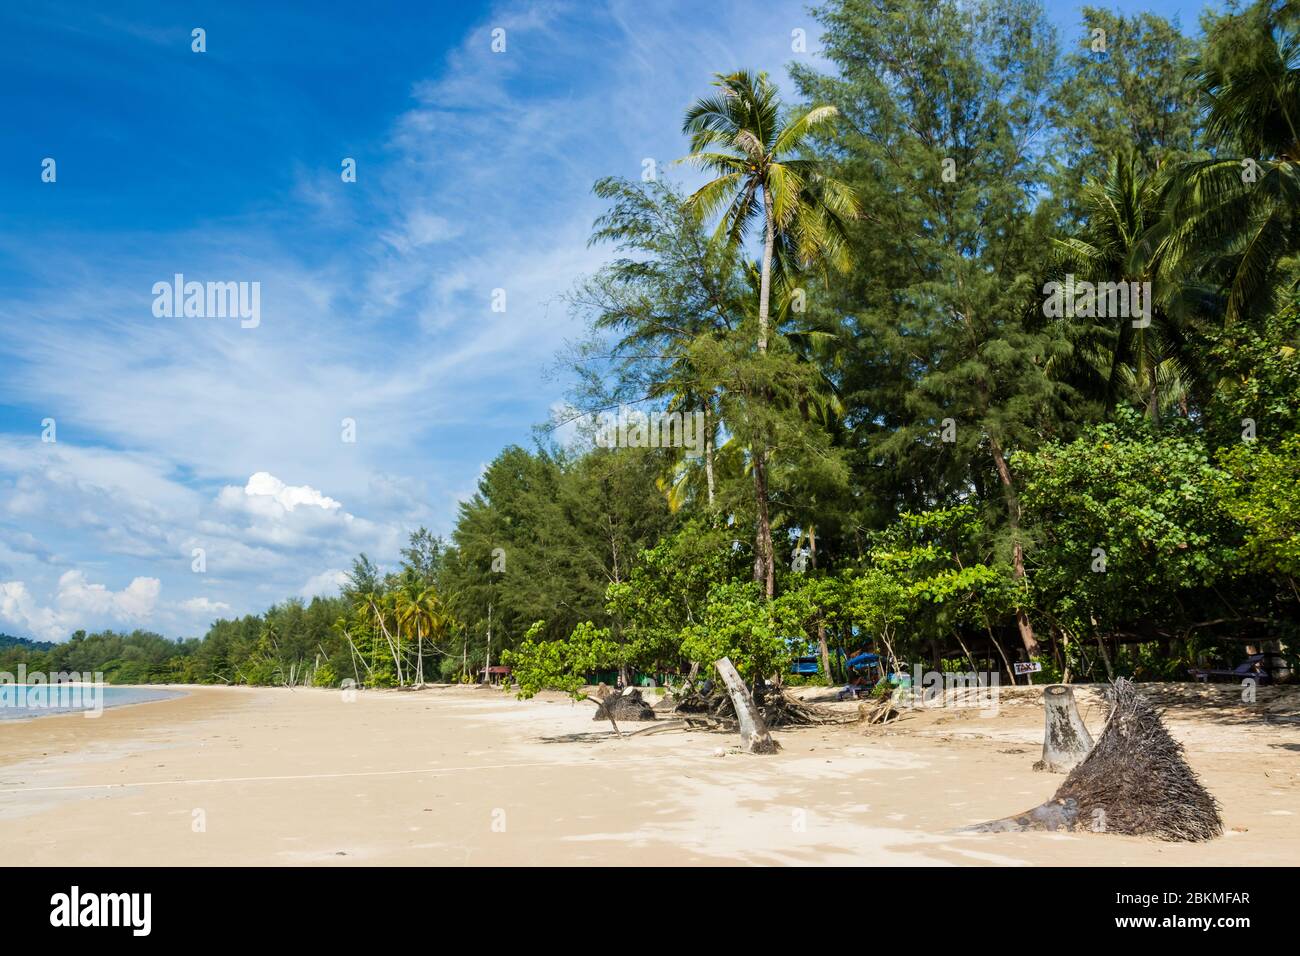 Completely deserted tropical beach in high season due to the Covid-19 Coronavirus lockdown and travel restrictions Stock Photo